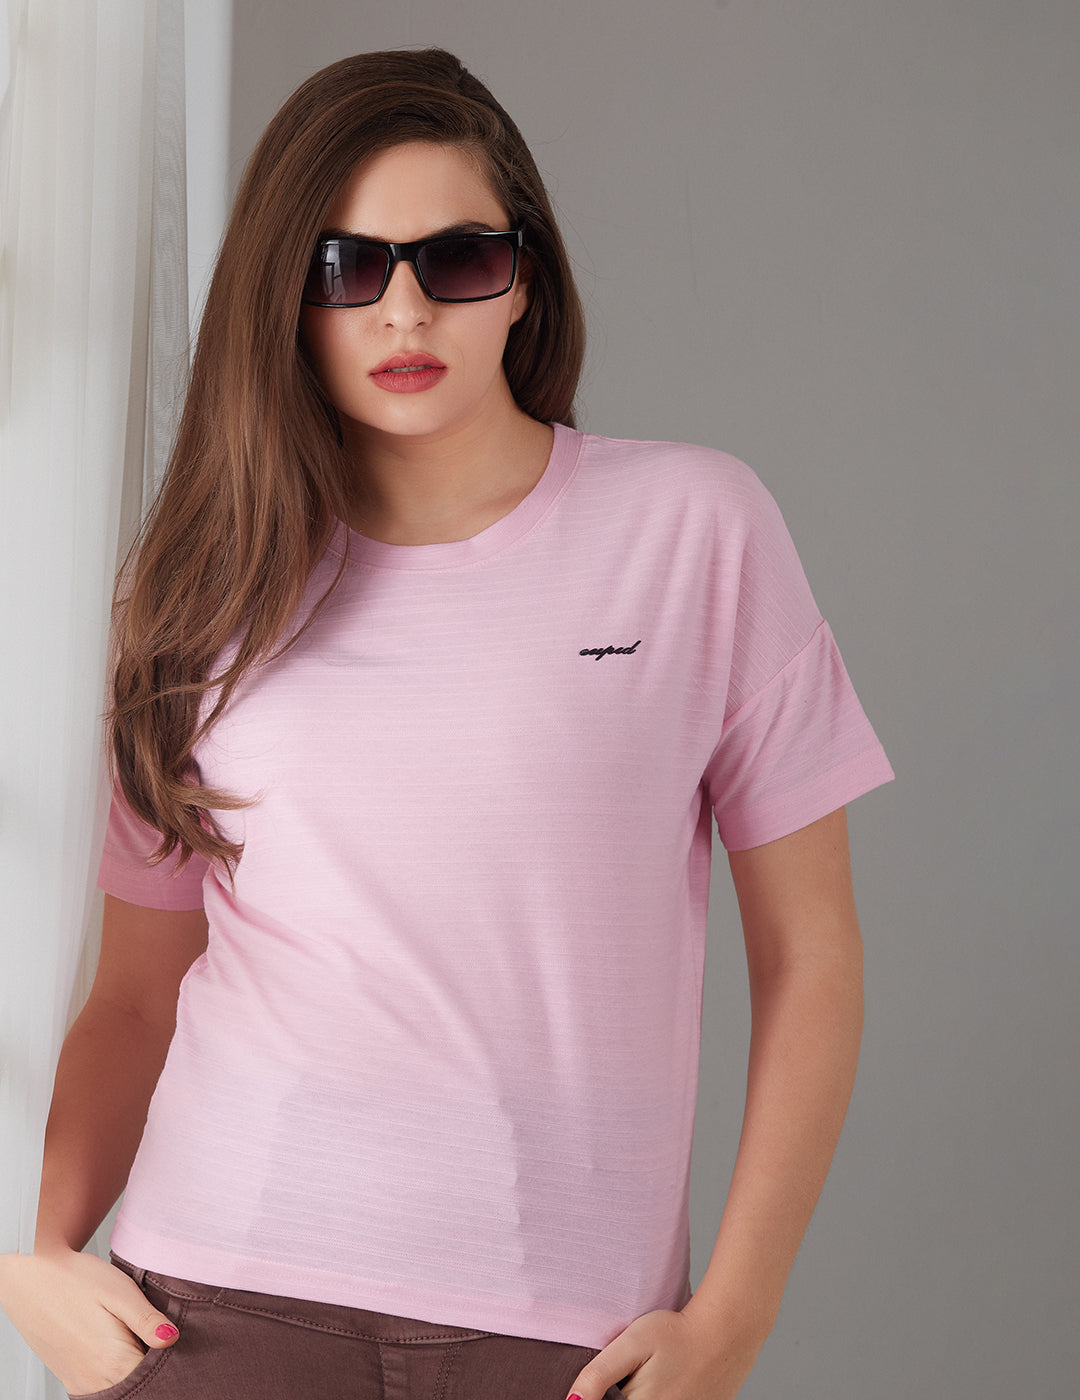 Stylish Plain Short T-Shirts for women In pink At Best Price 